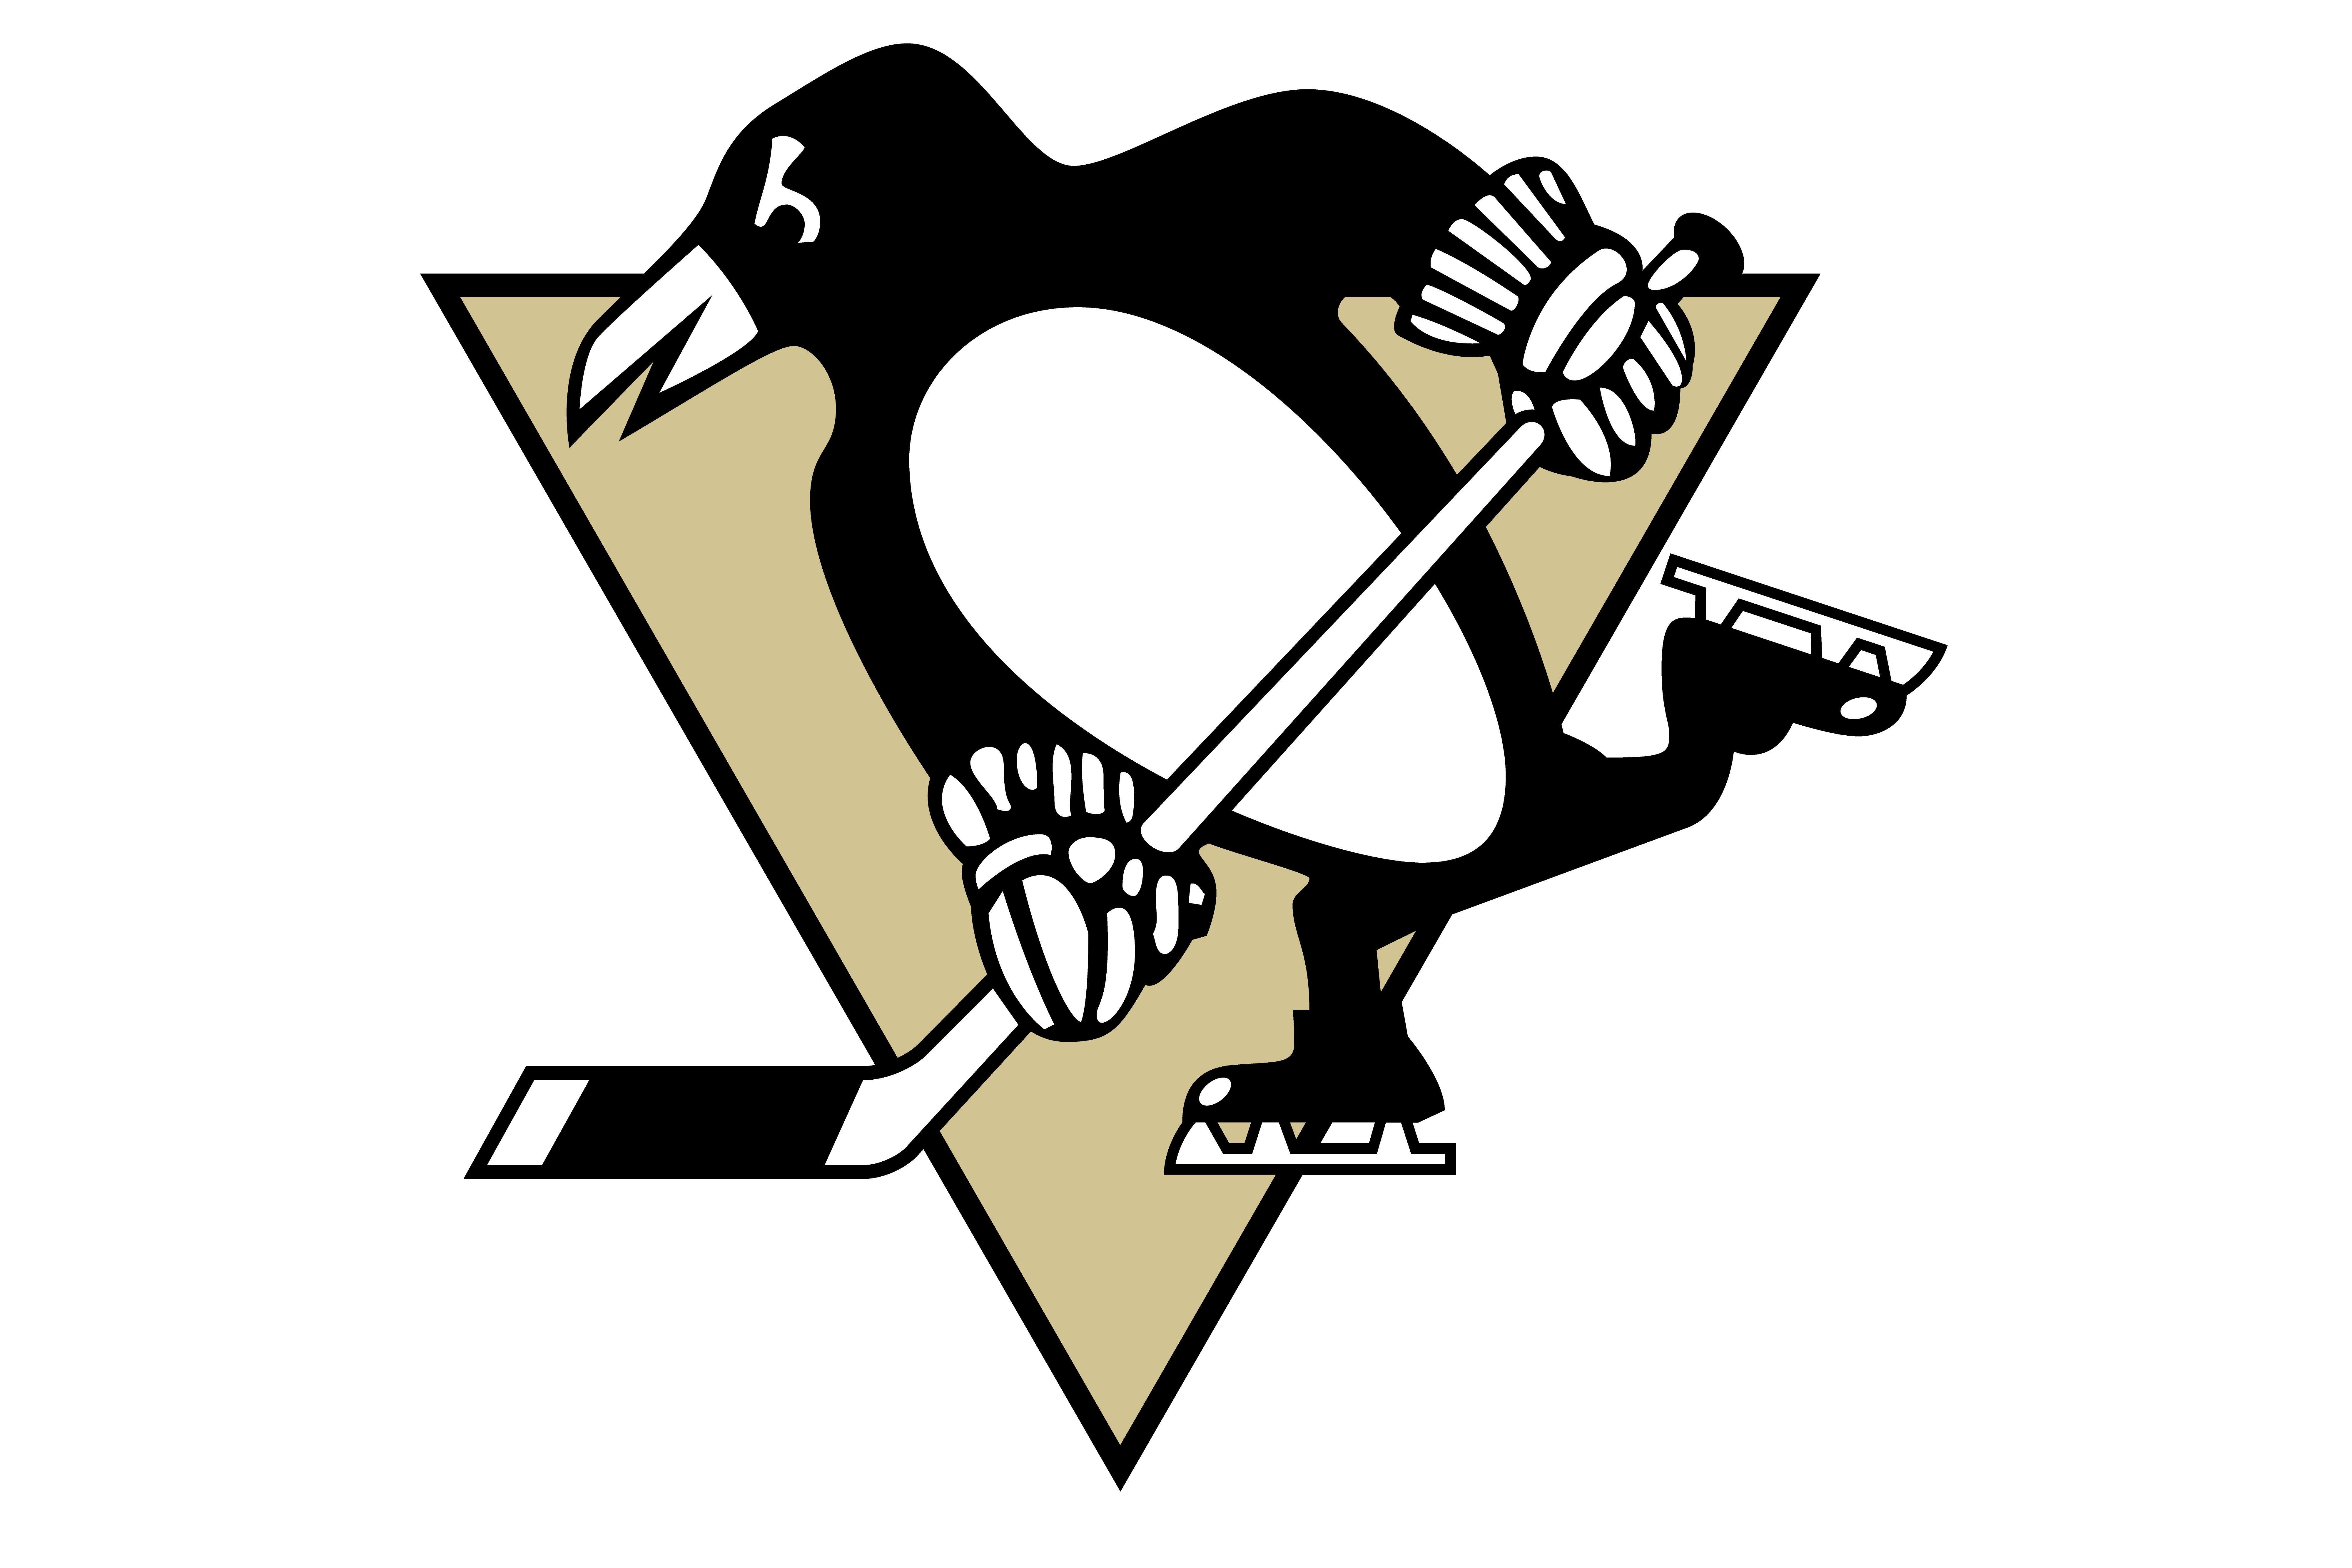 Picture Of Pittsburgh Penguins By Gable Jones 2017 03 19